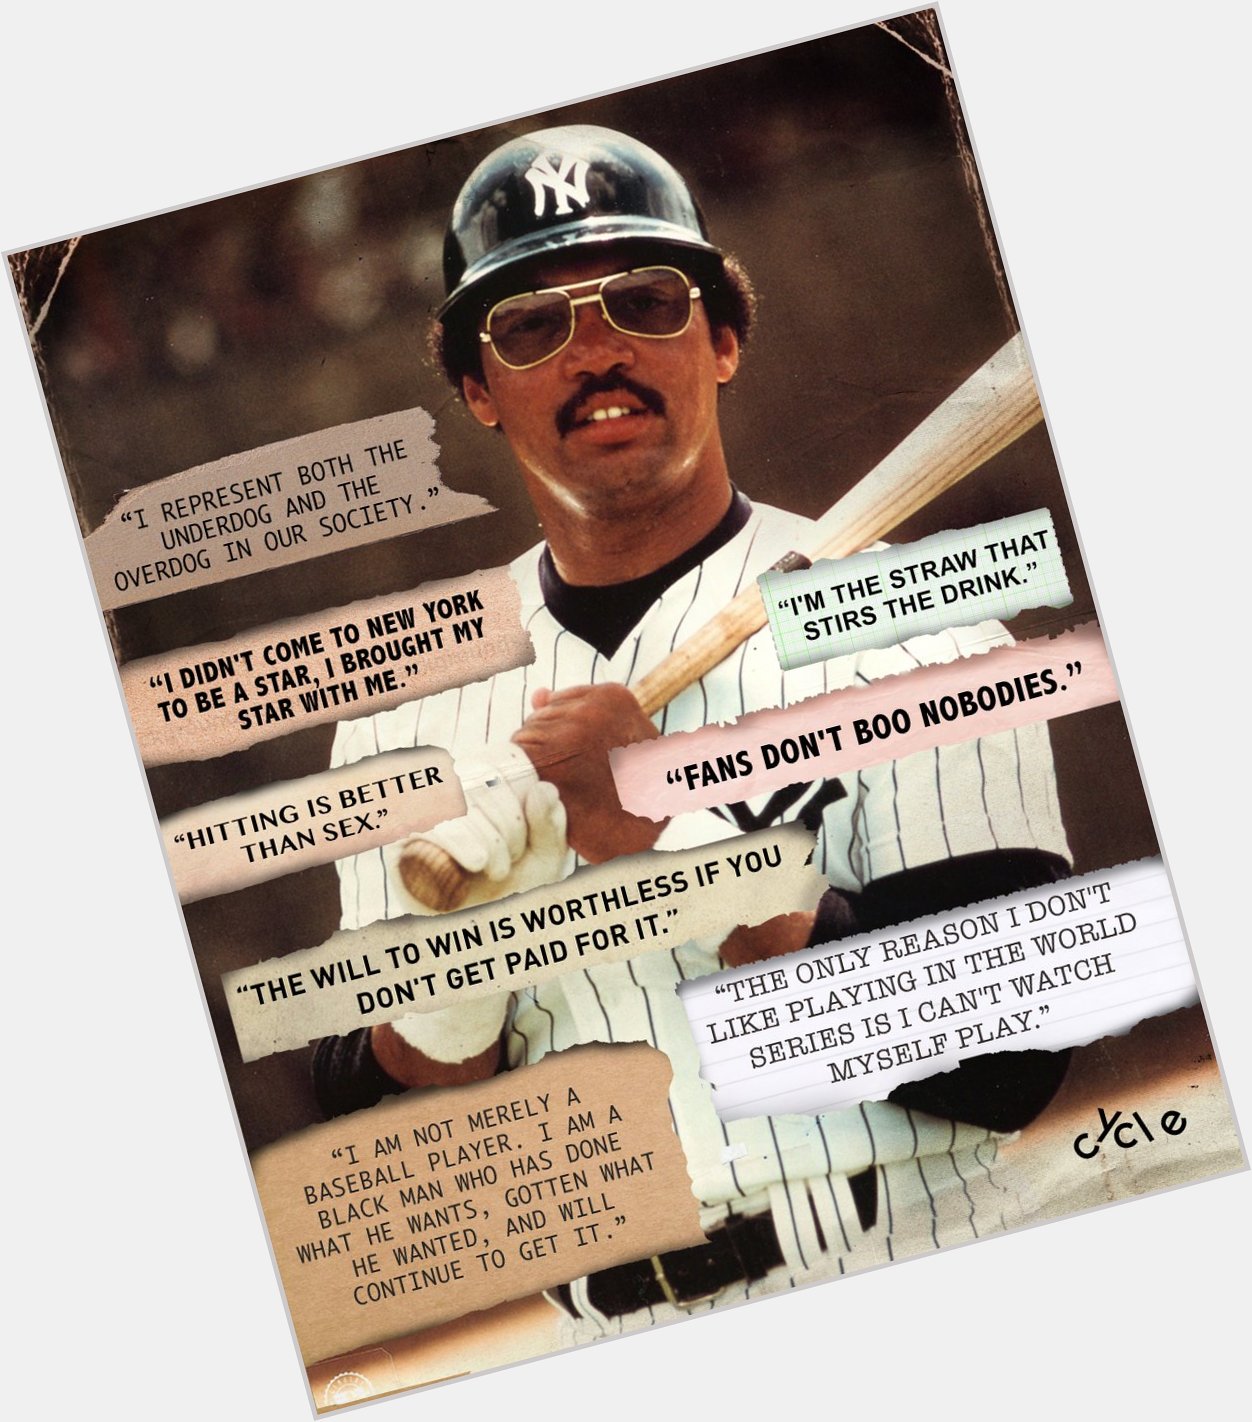 Nobody in baseball talked that talk like Reggie Jackson.

Happy birthday to the one and only. 